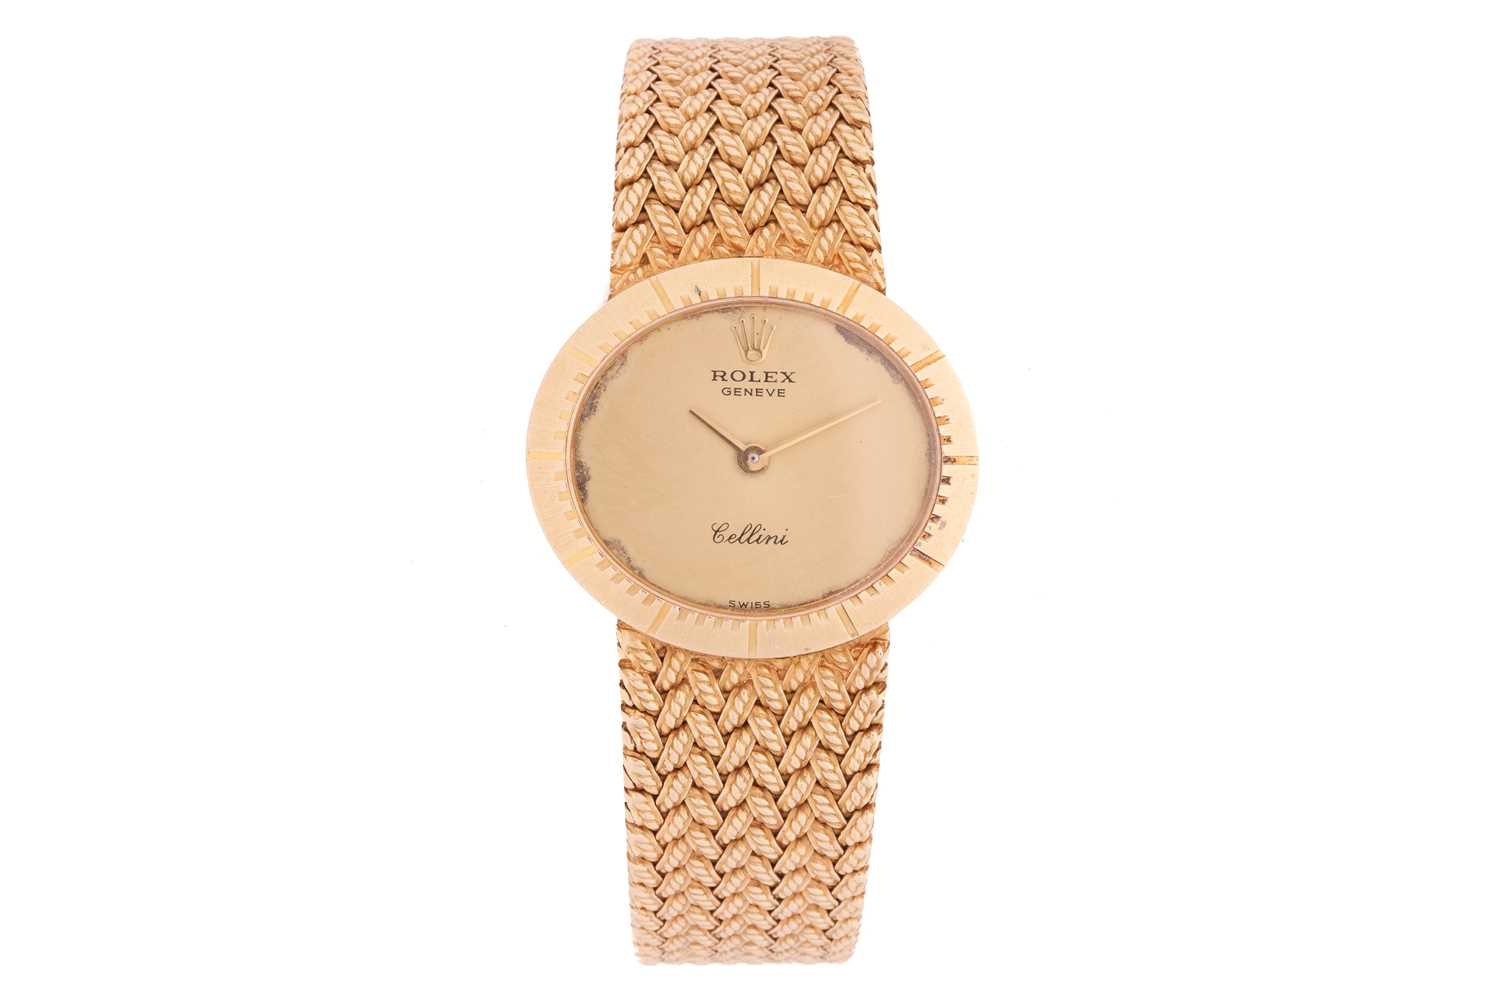 An 18ct gold Rolex Cellini ladies wristwatch, featuring a champagne face with gilded hands, set in a